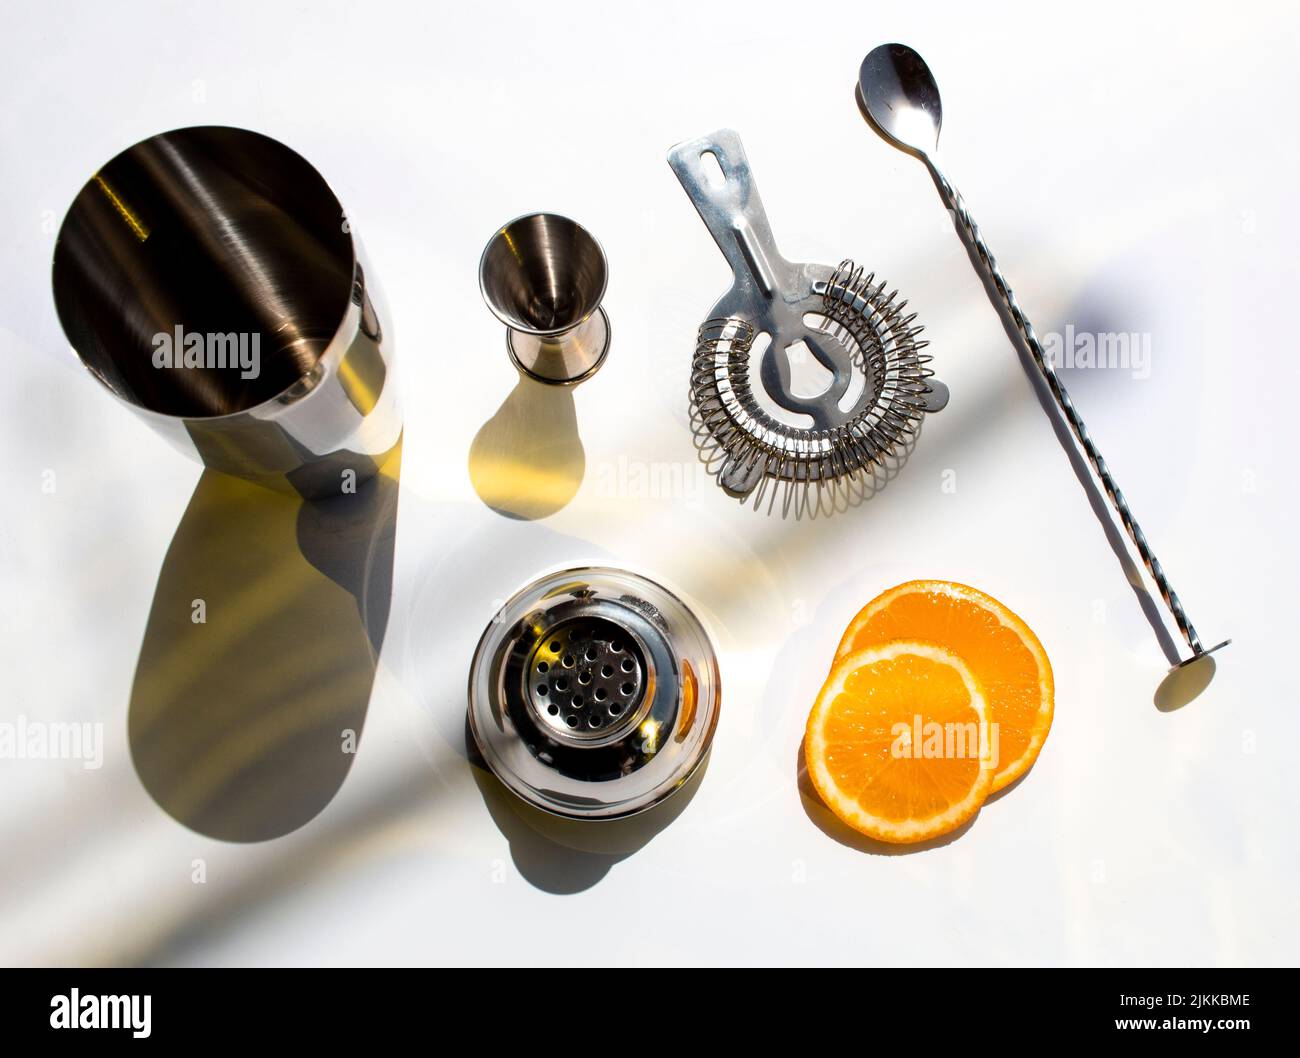 A top view of barware for making cocktails with orange slices on a white background Stock Photo